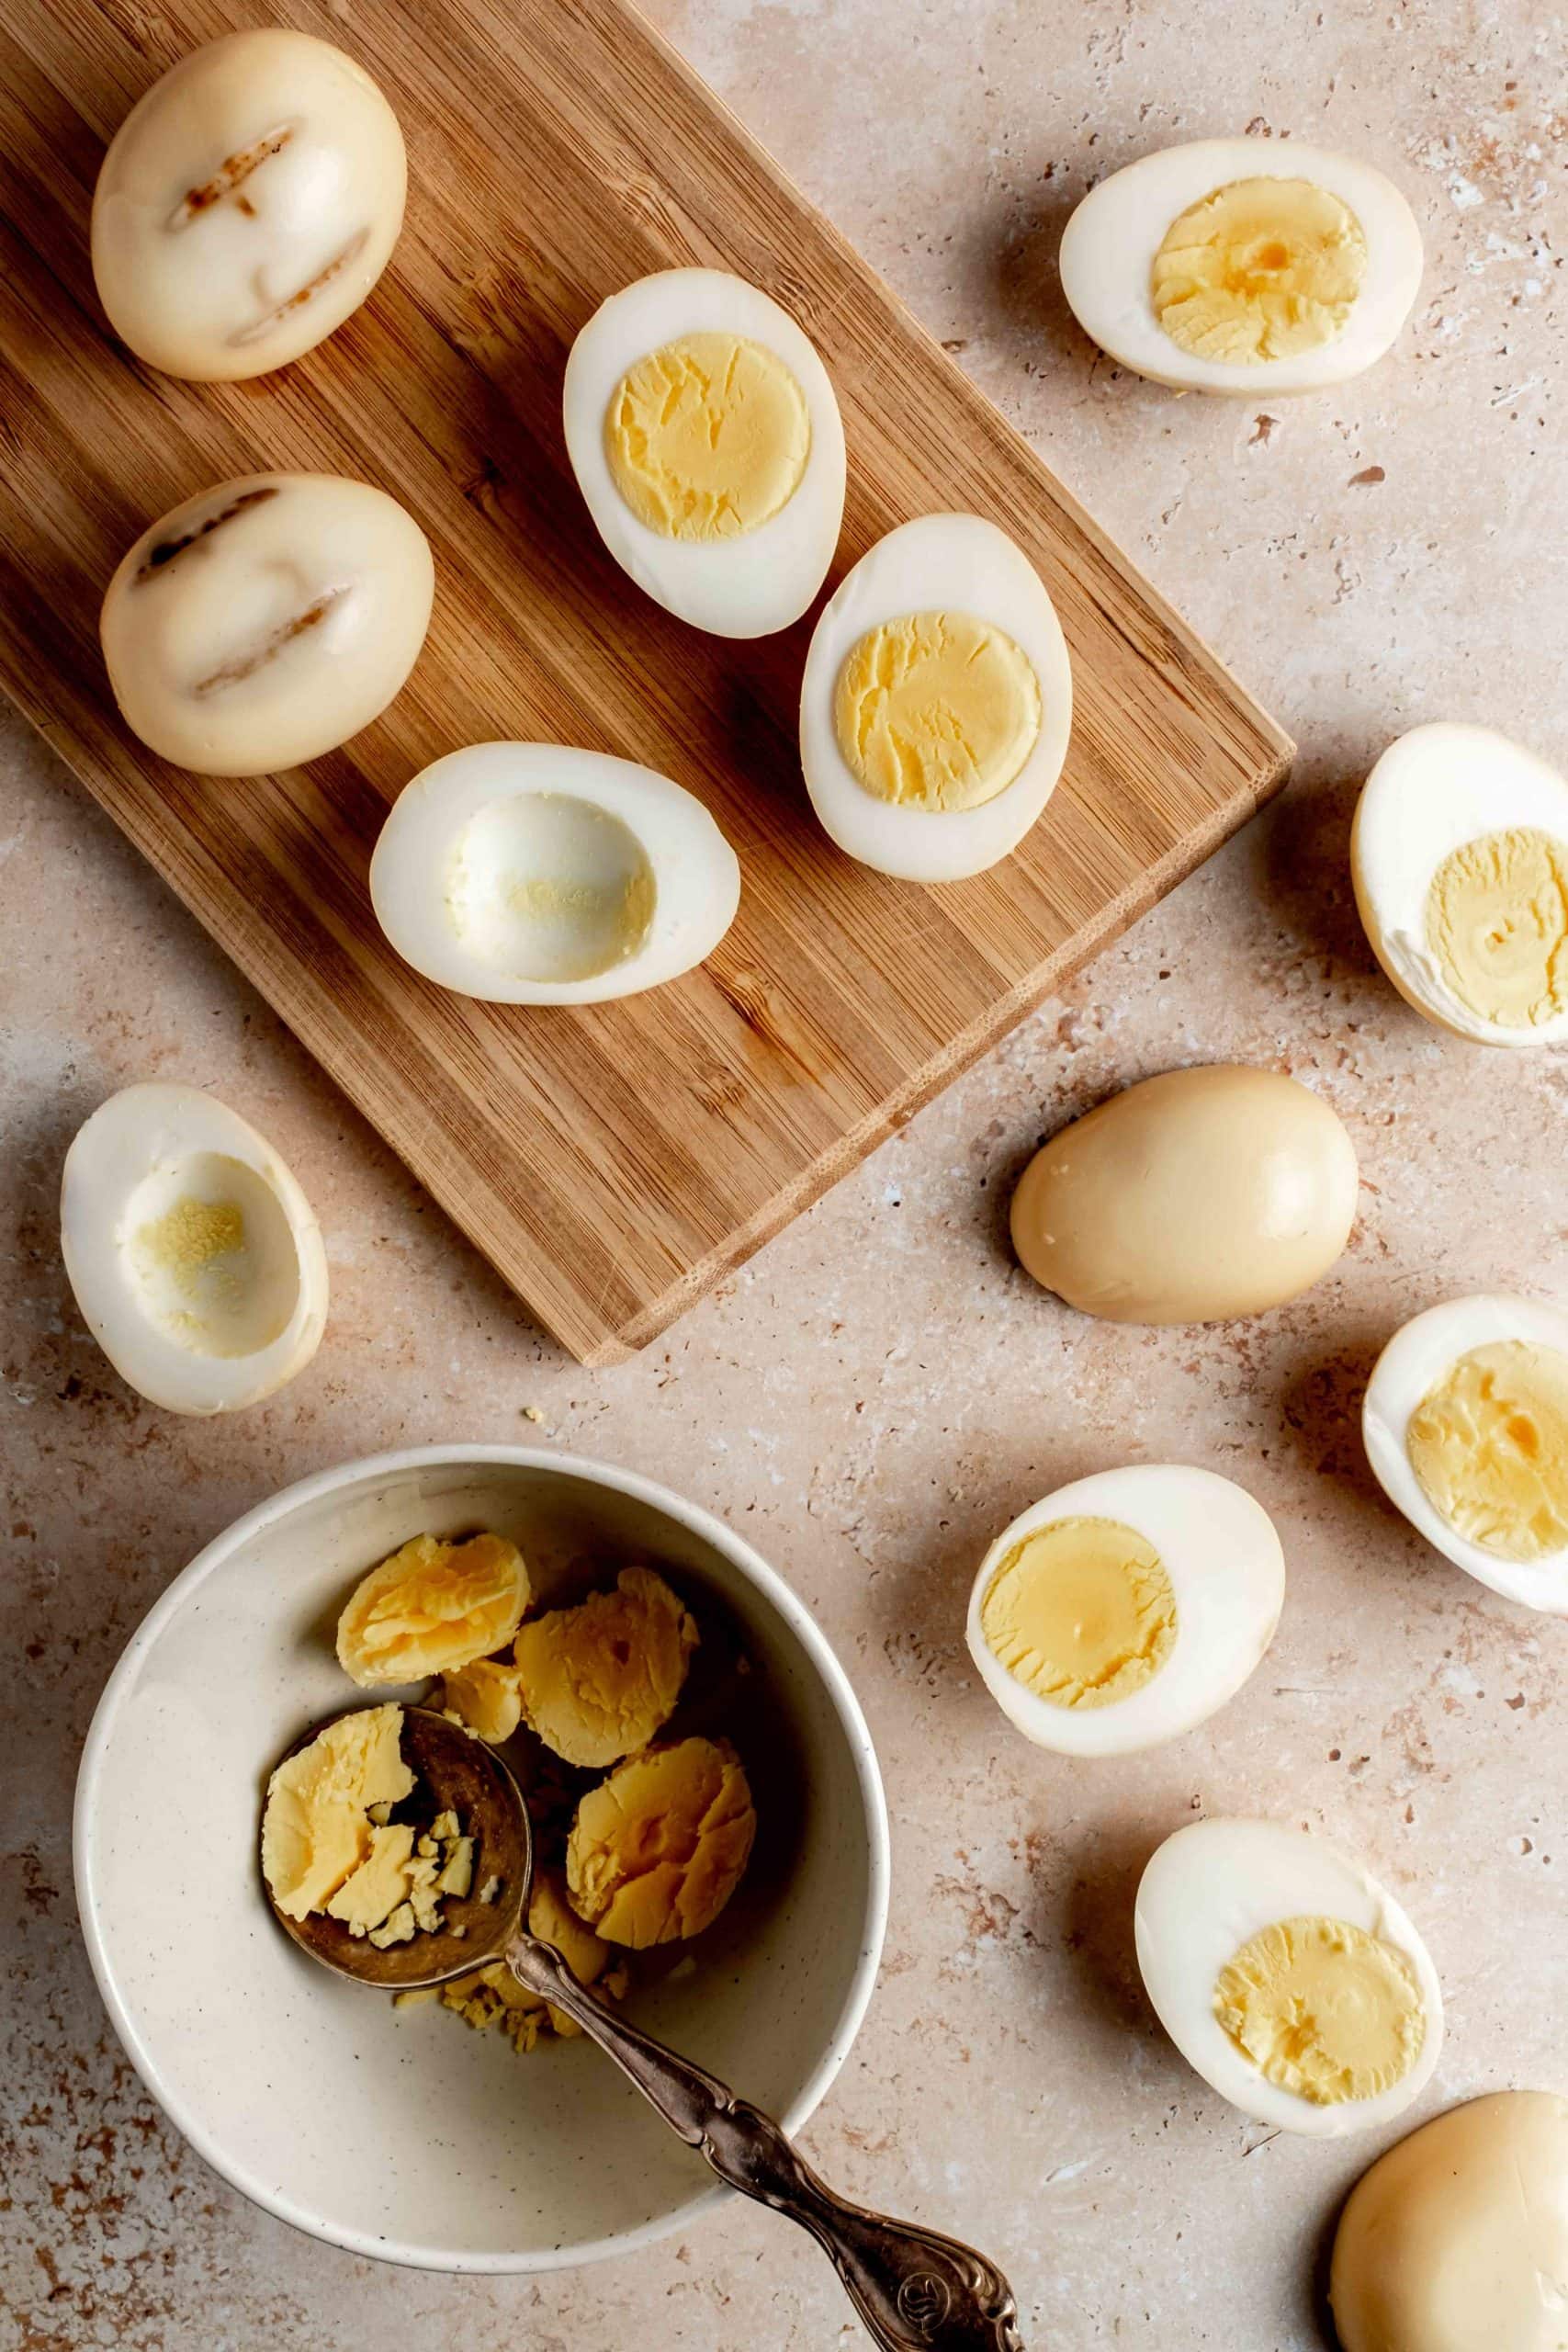 removing the yolks from the hard-boiled eggs